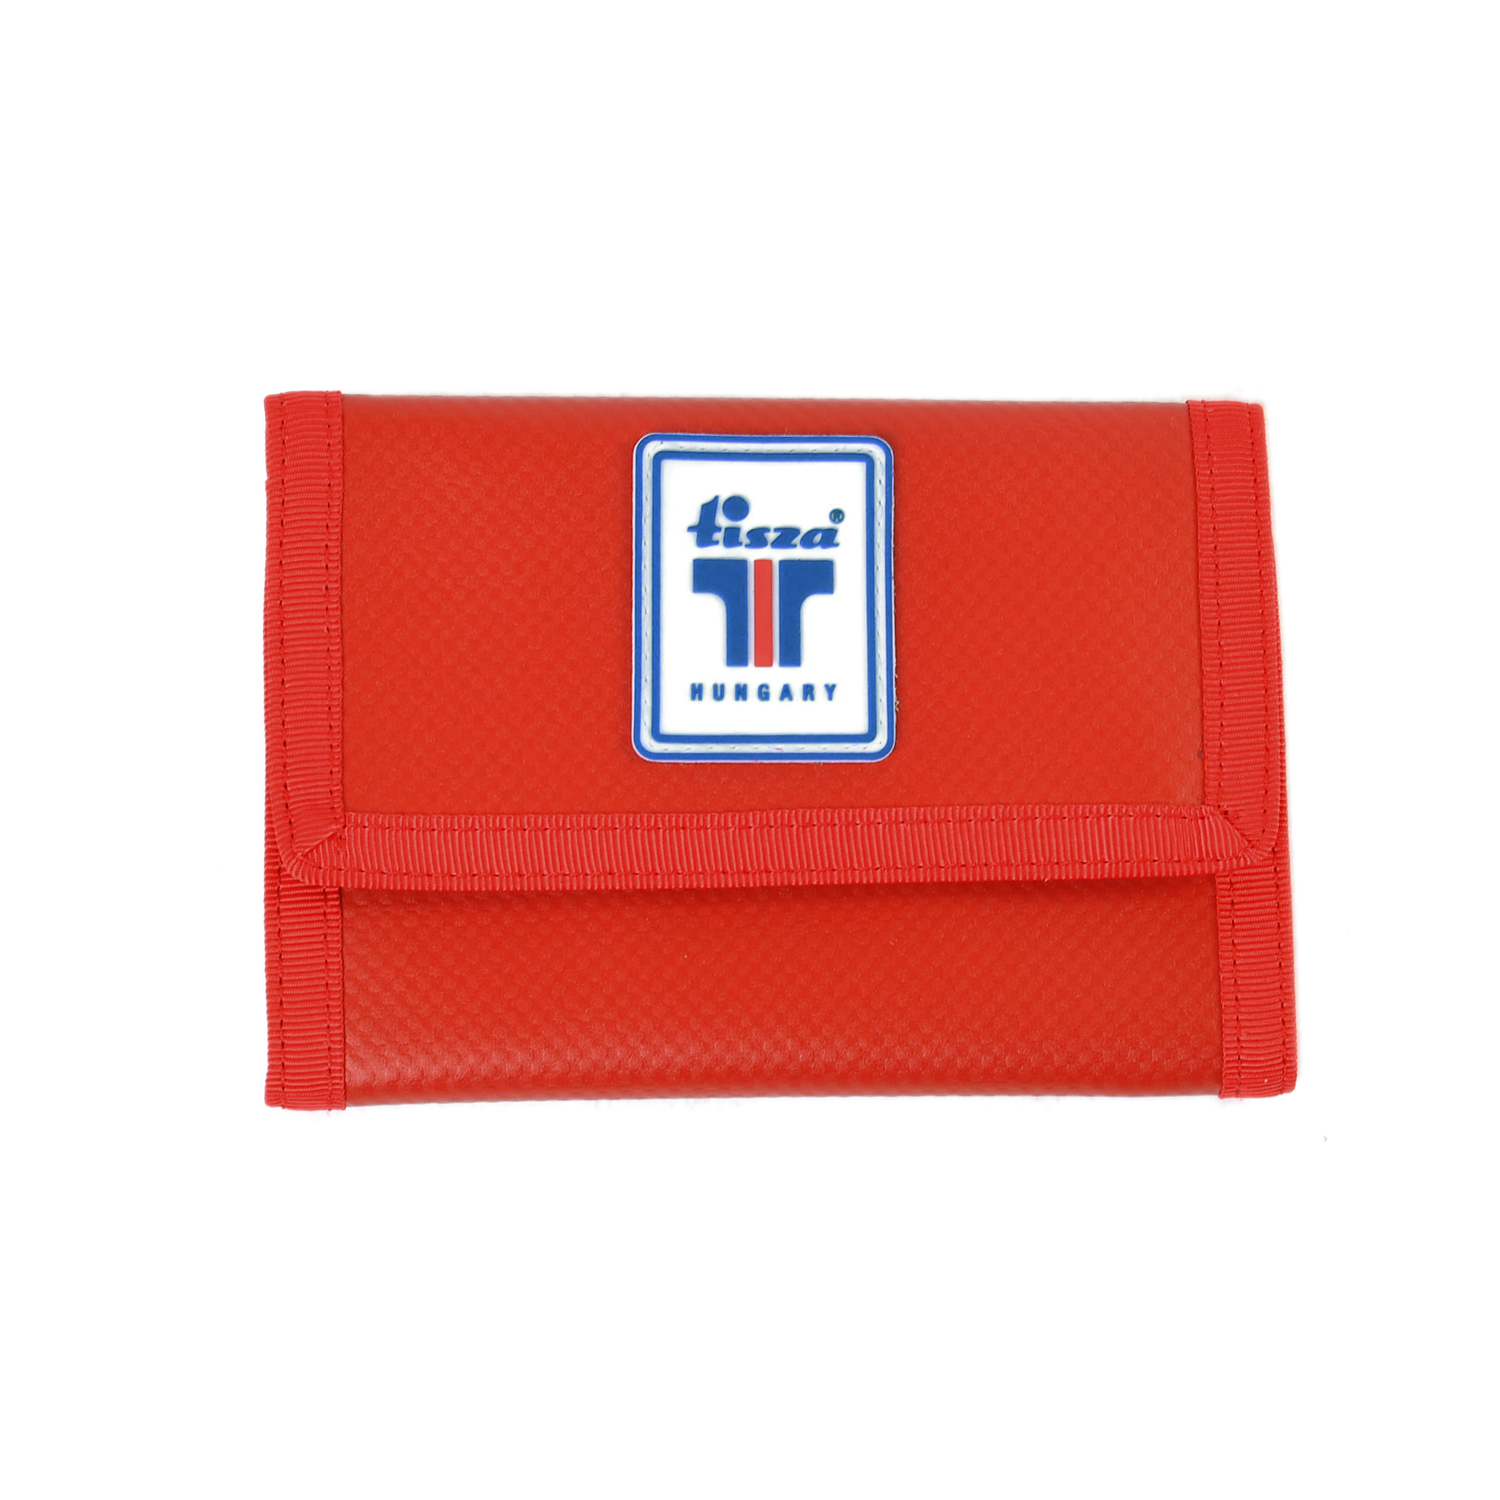 Tisza shoes - Purses - Red